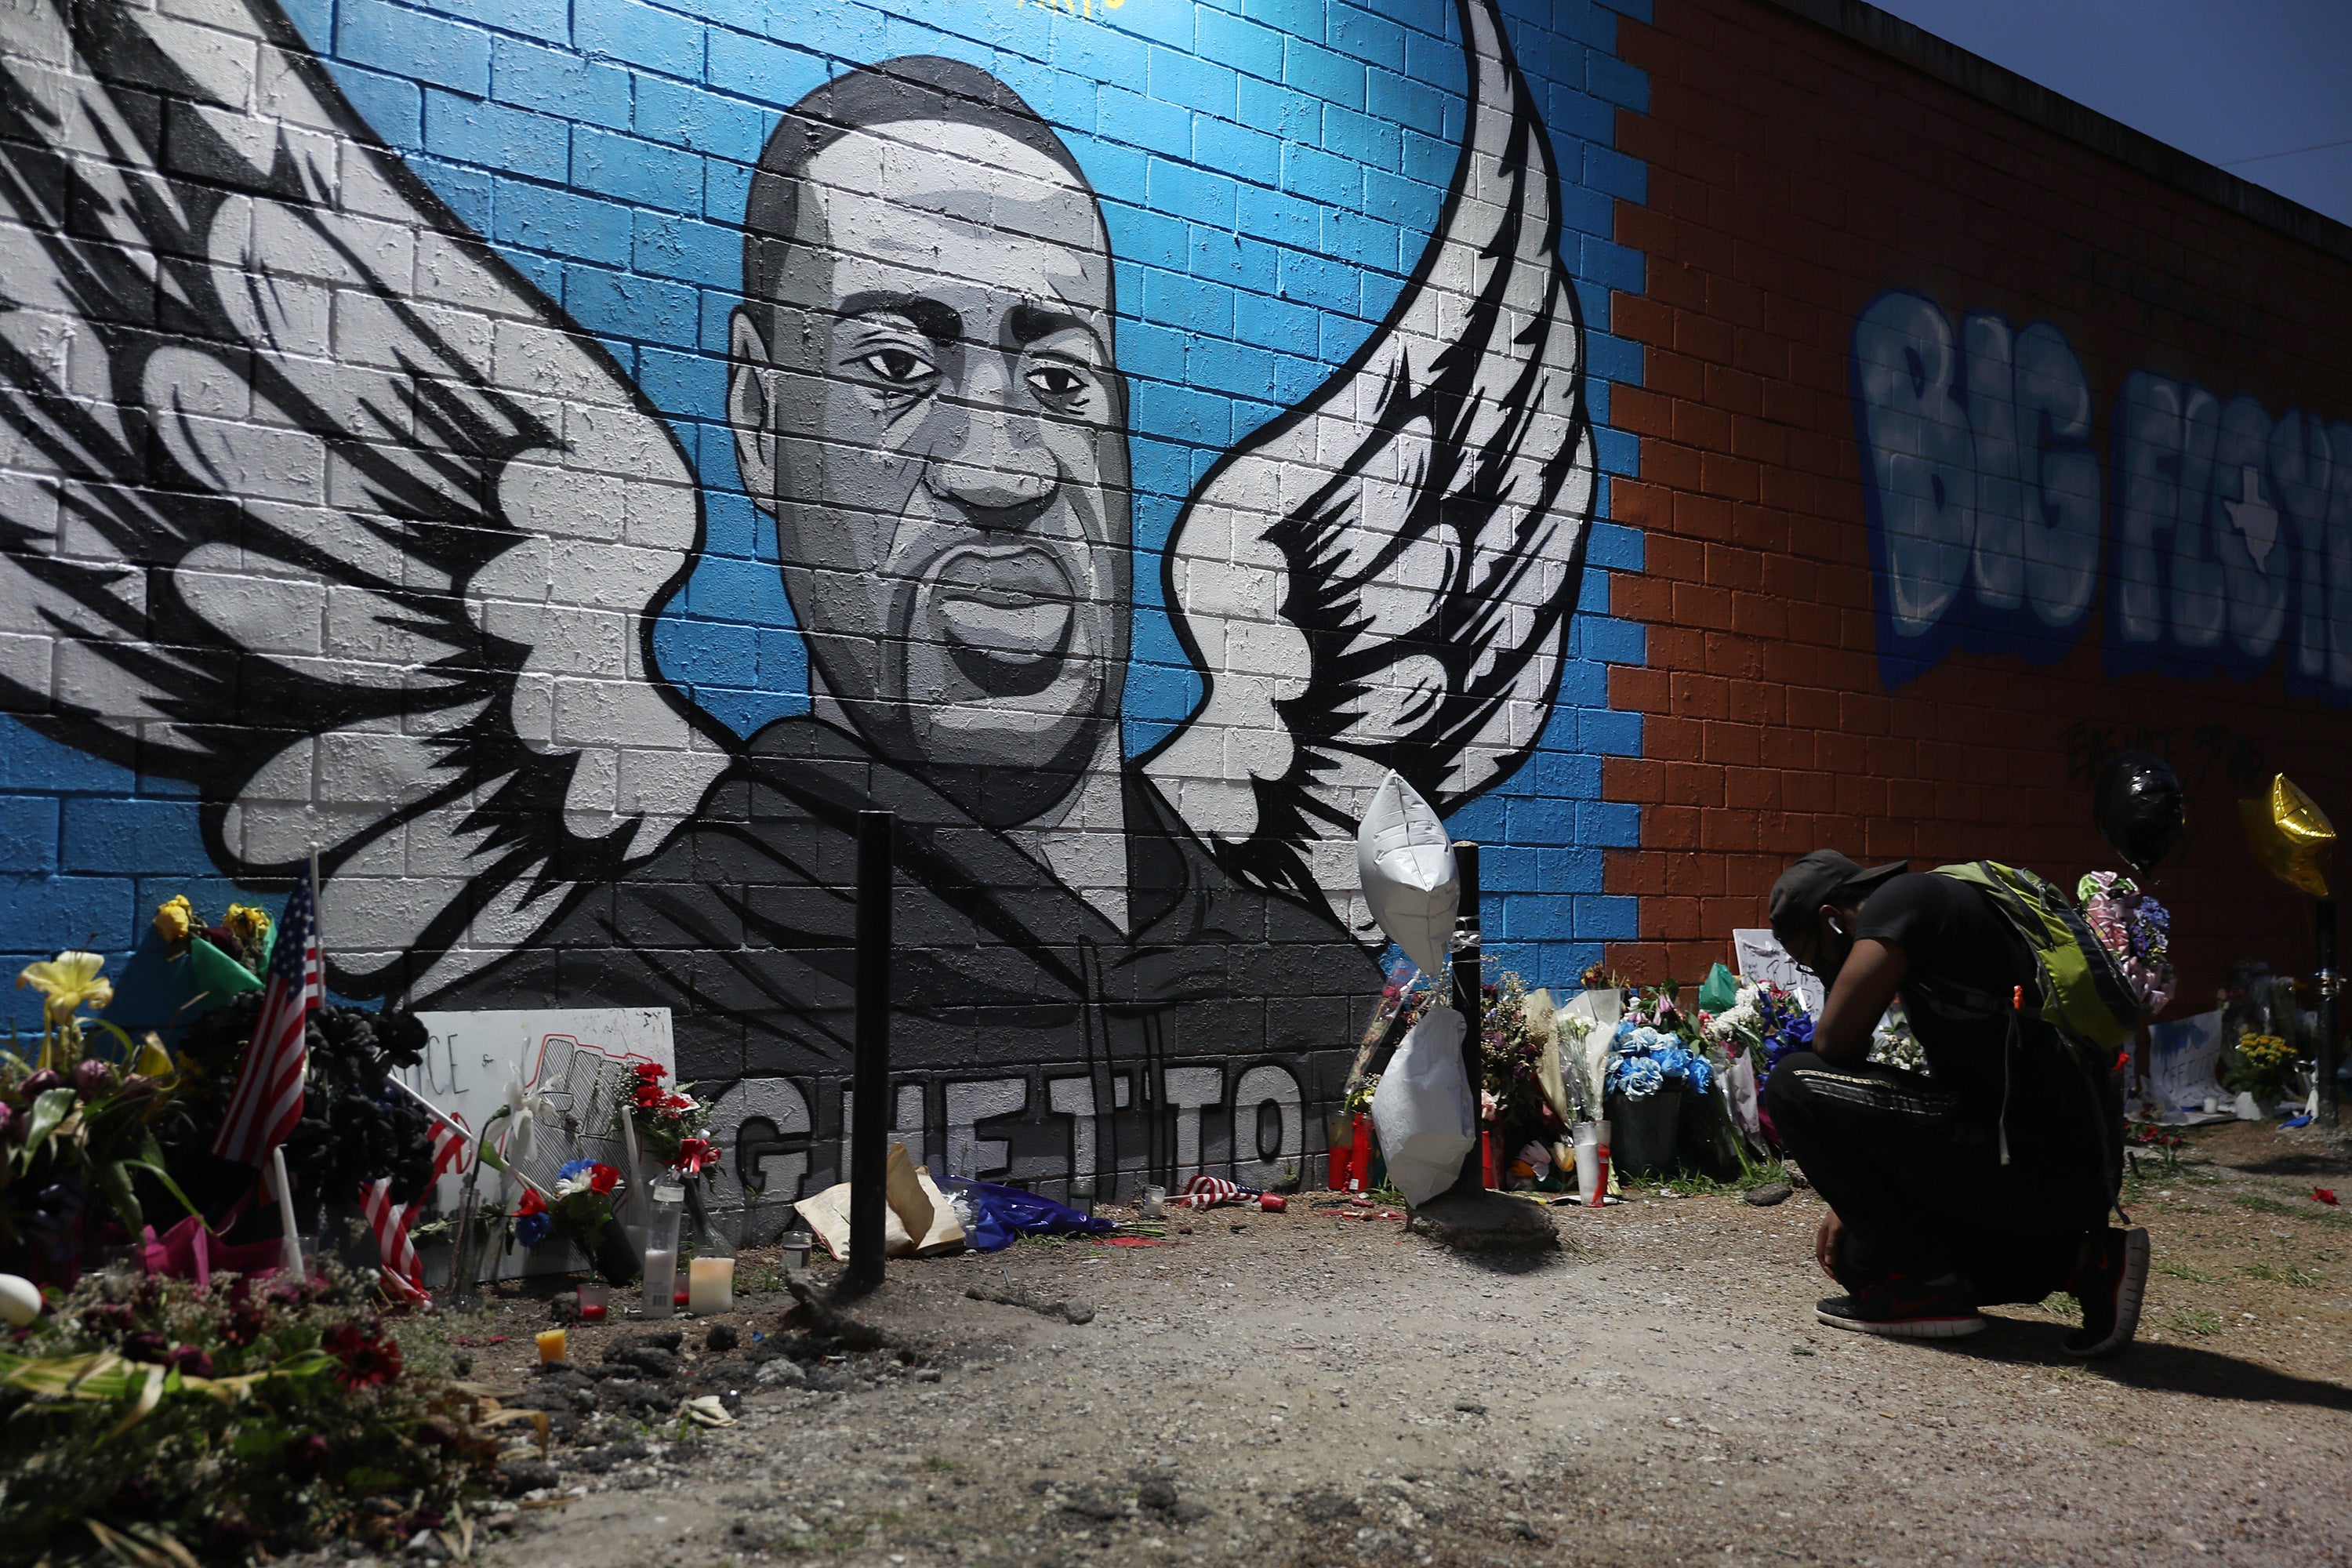 Joshua Broussard kneels in front of a memorial and mural that honors George Floyd at the Scott Food Mart corner store in Houston's Third Ward where Floyd grew up, on June 8, 2020 in Houston, Texas